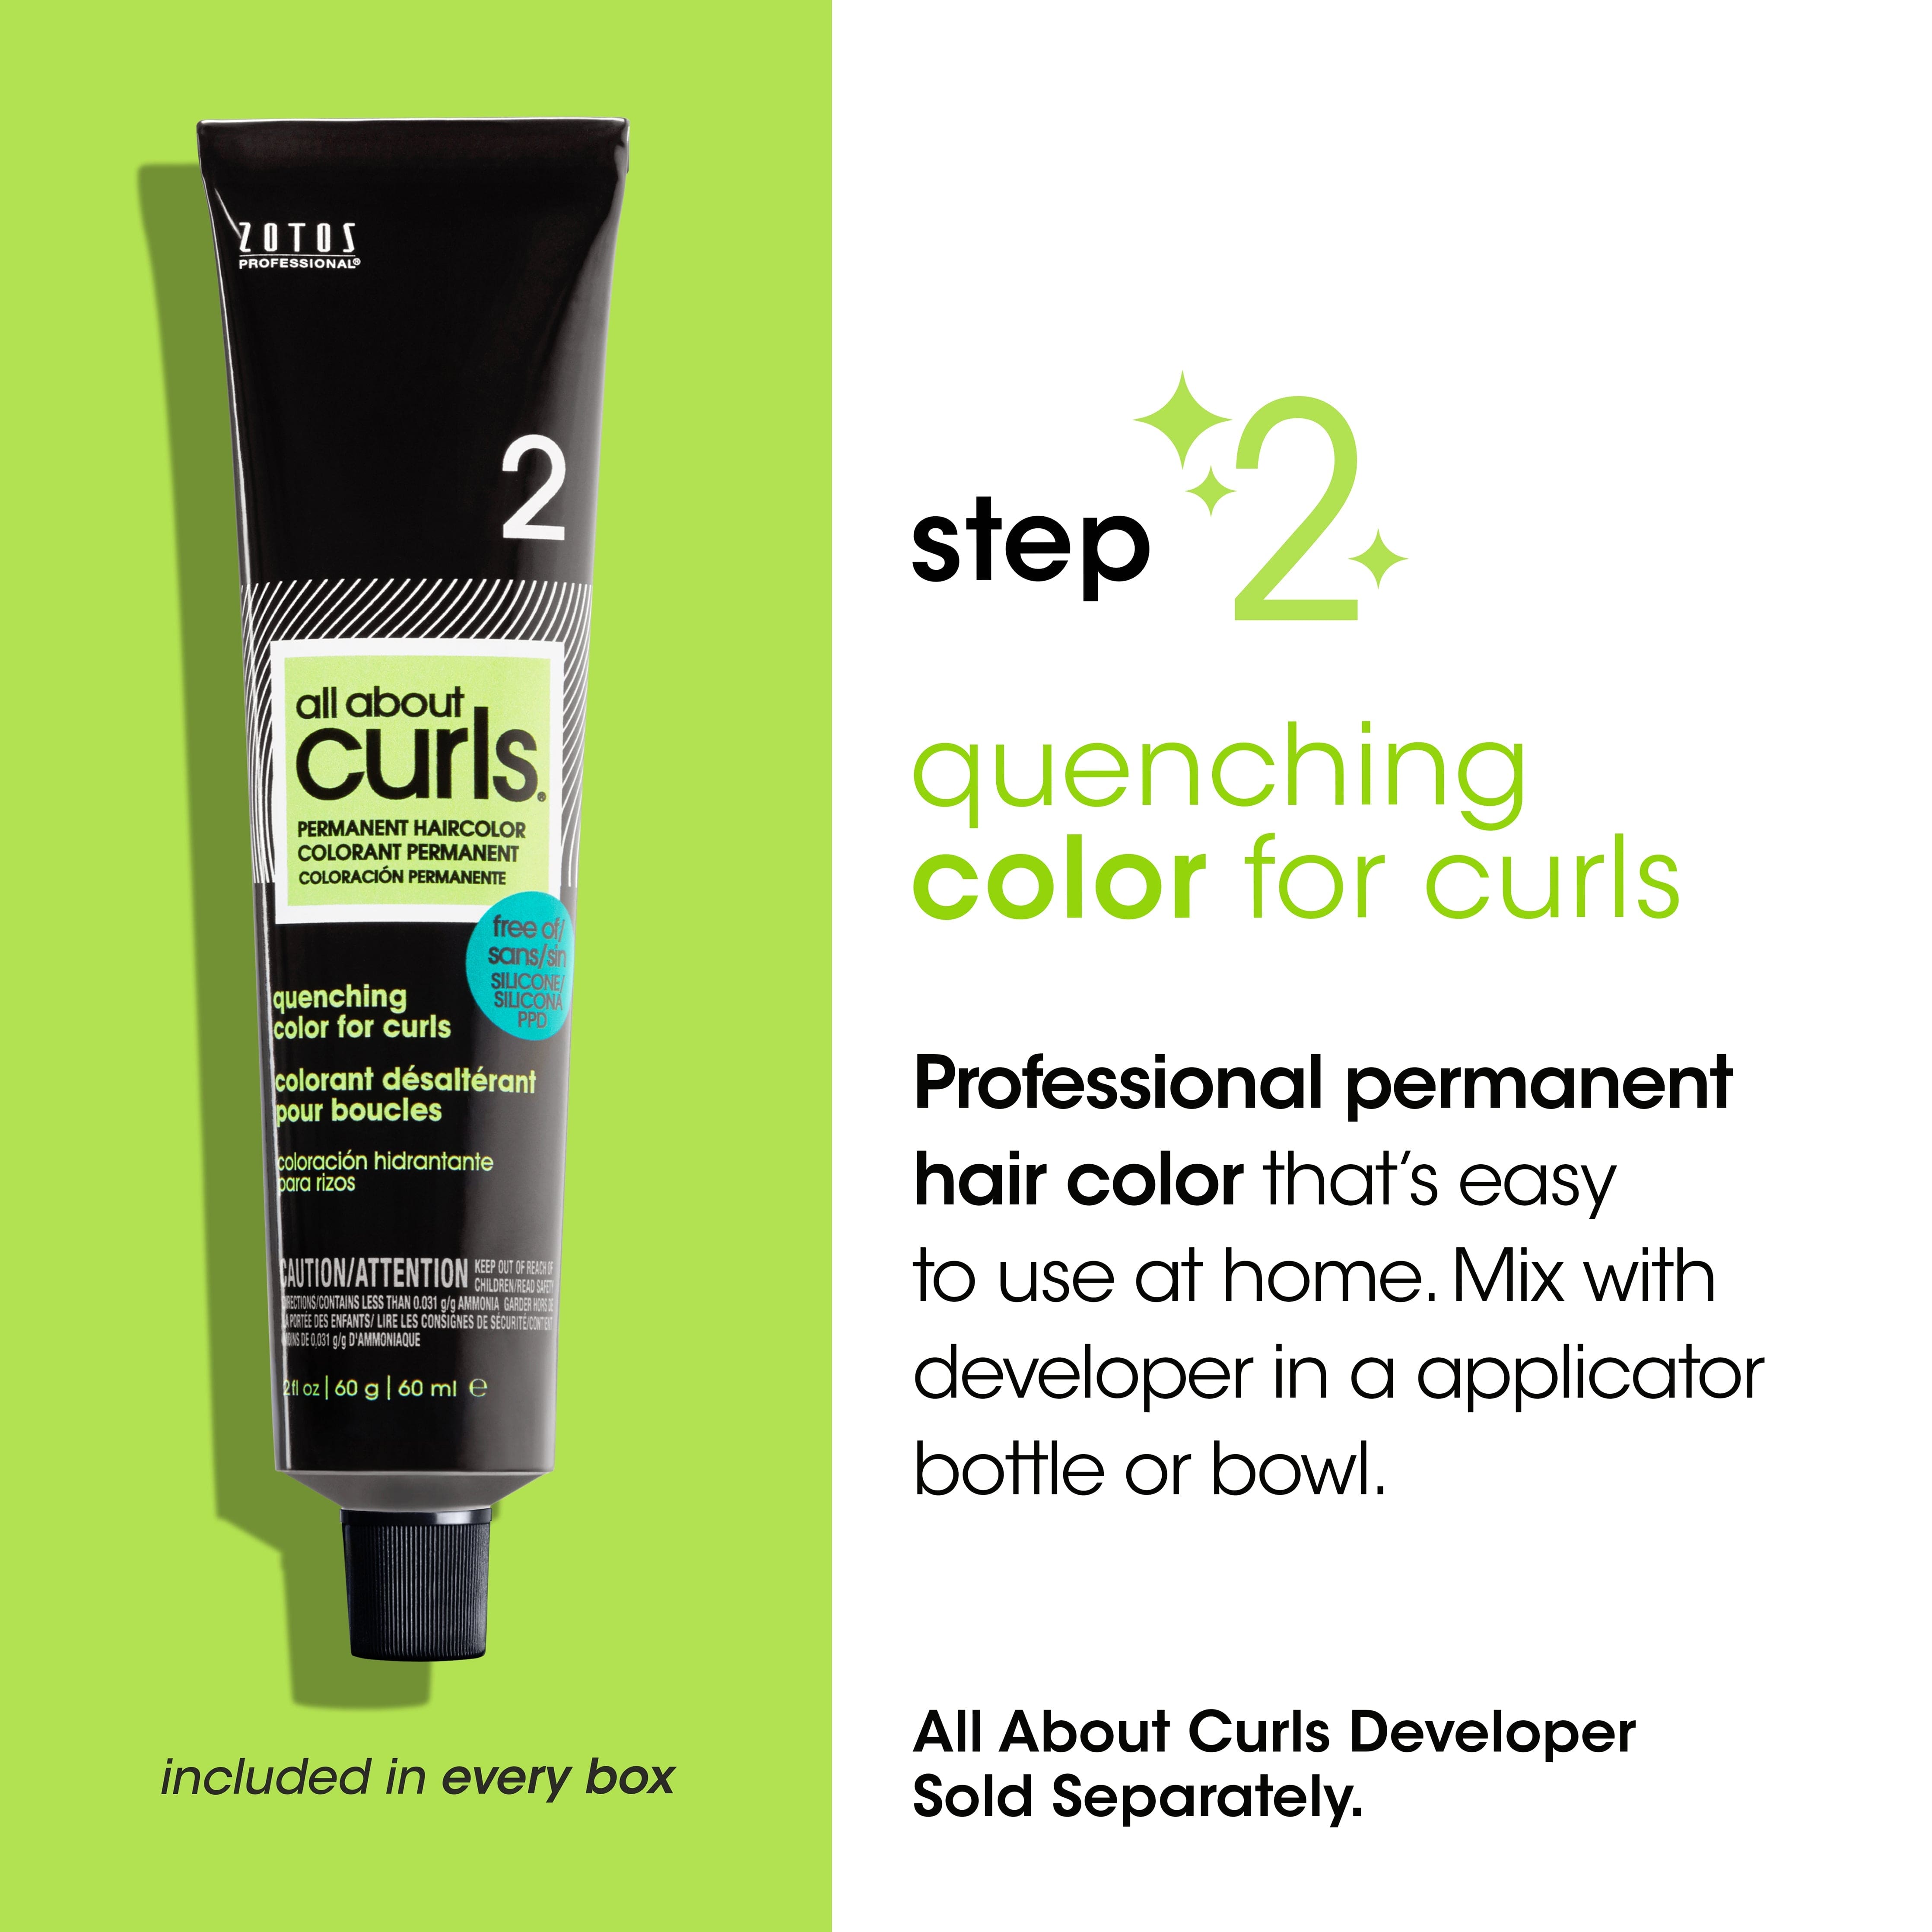 Step 2: Quenching color for curls (included in every box). Professional permanent hair color that's easy to use at home. Mix with developer in an applicator bottle or bowl. (All About Curls Developer Sold Separately).